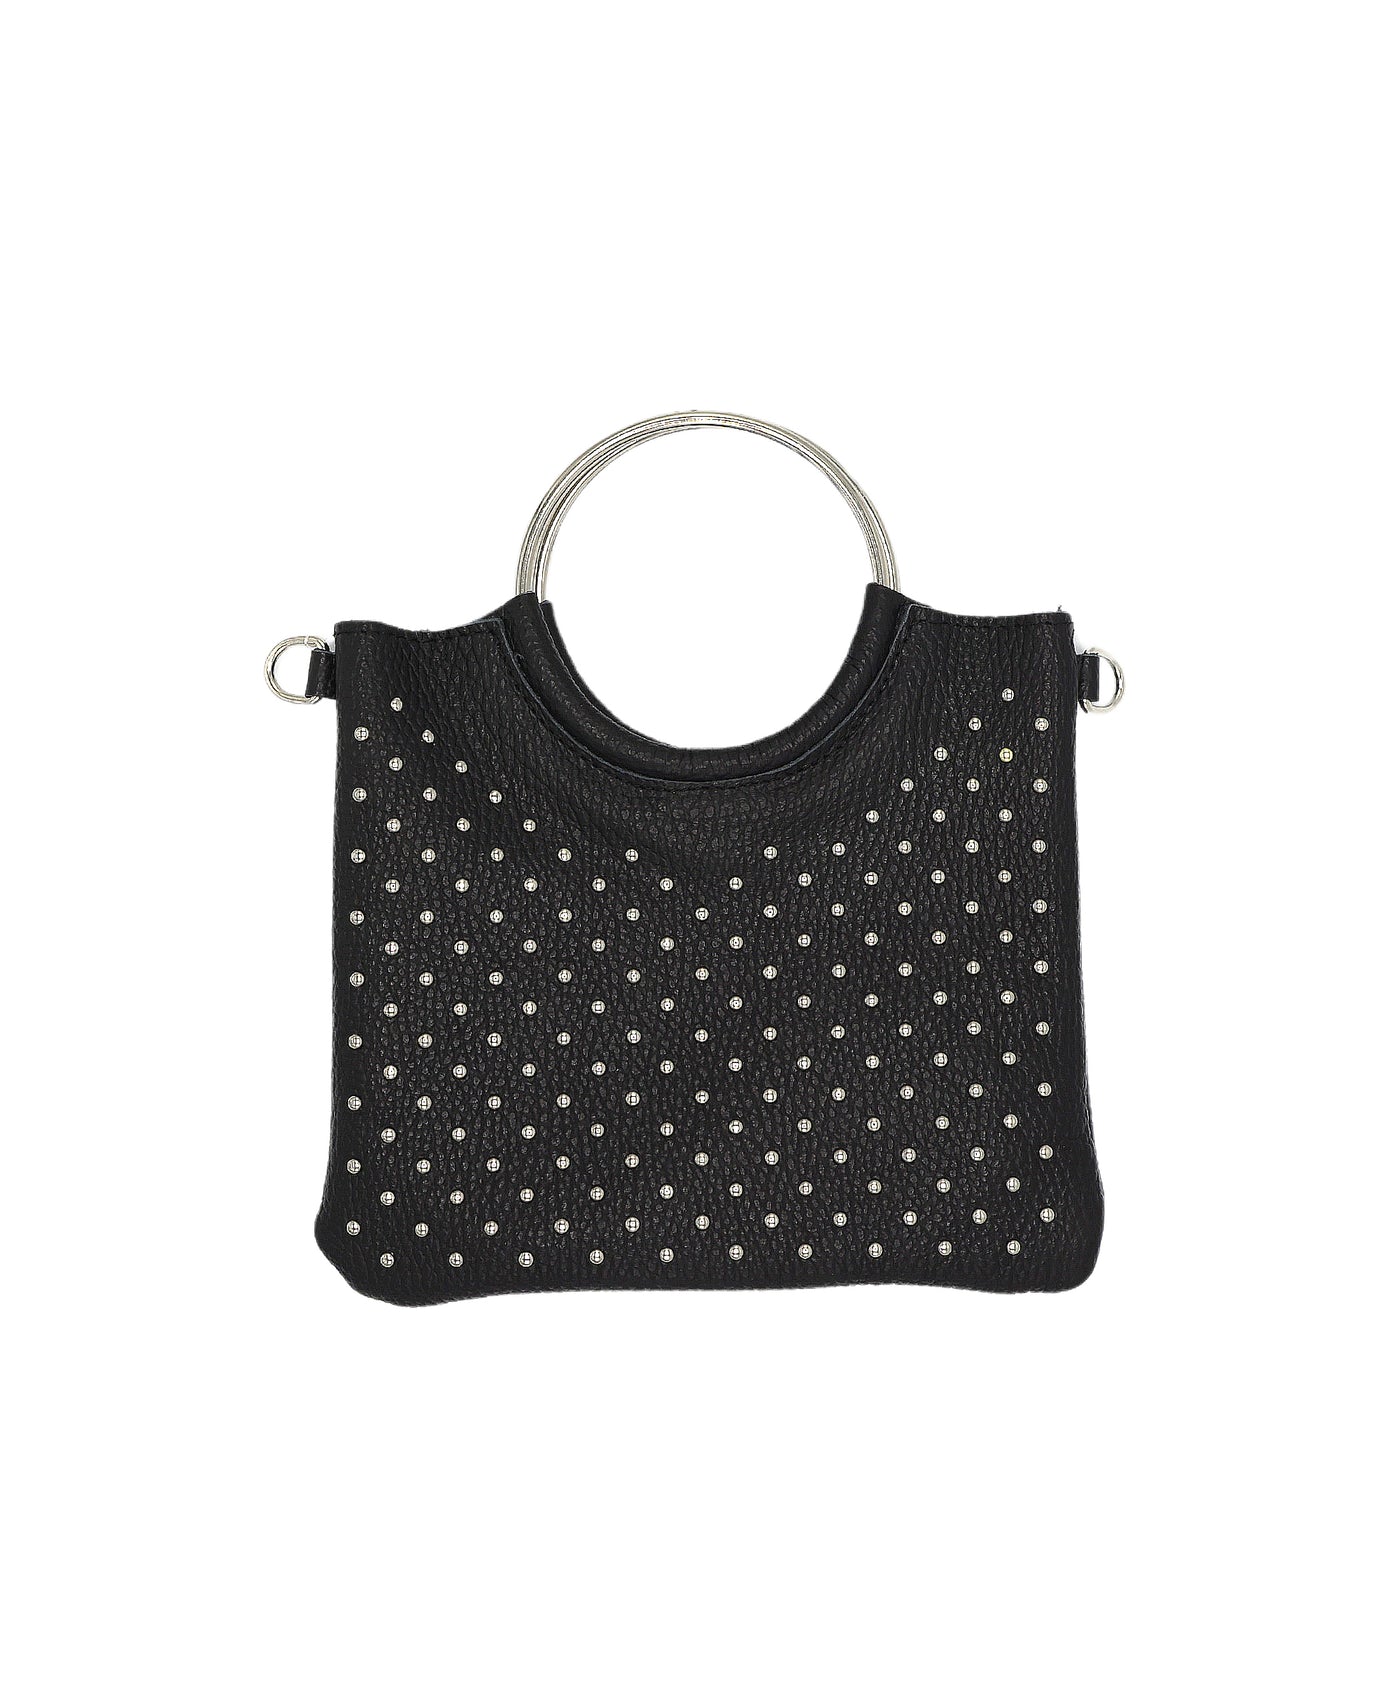 Leather Studded Bag w/ Ring Handle image 1